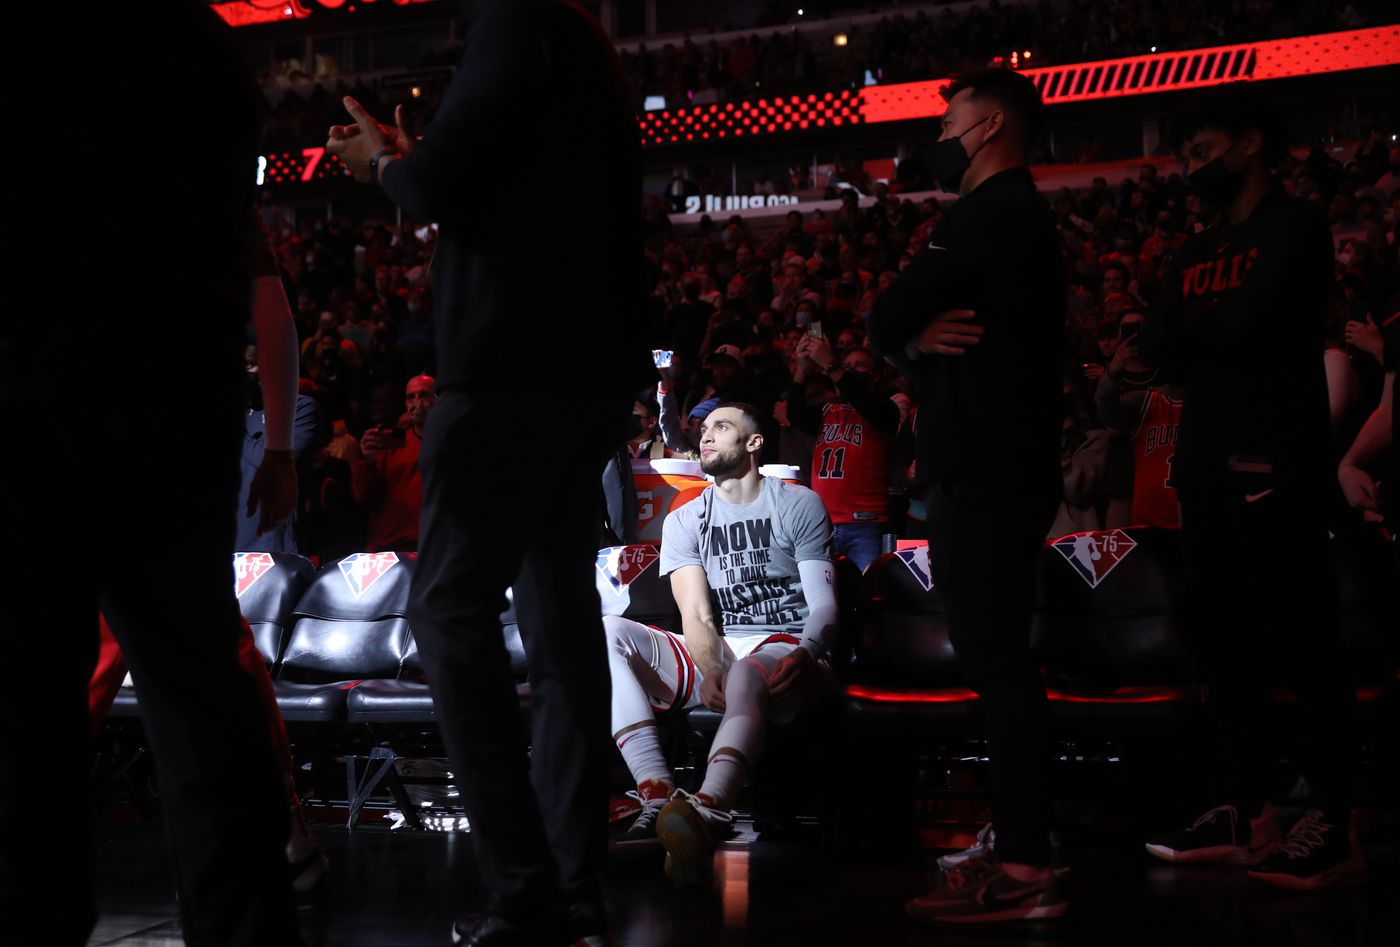 Chicago Bulls guard Zach LaVine (8) sits on the bench before his name is announced for a game against the Golden State Warriors at United Center on Jan. 14, 2022, in Chicago.